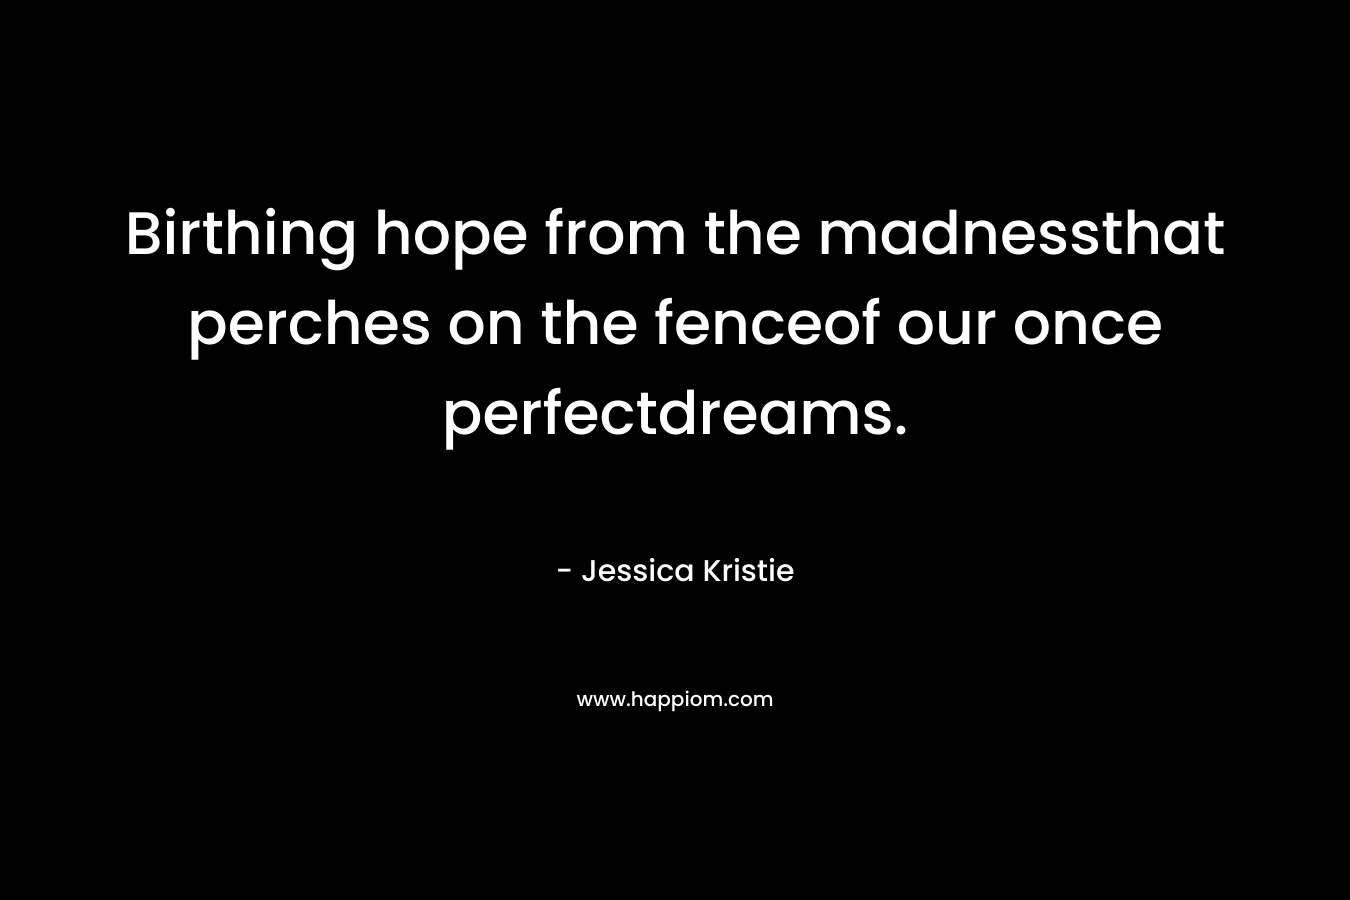 Birthing hope from the madnessthat perches on the fenceof our once perfectdreams.